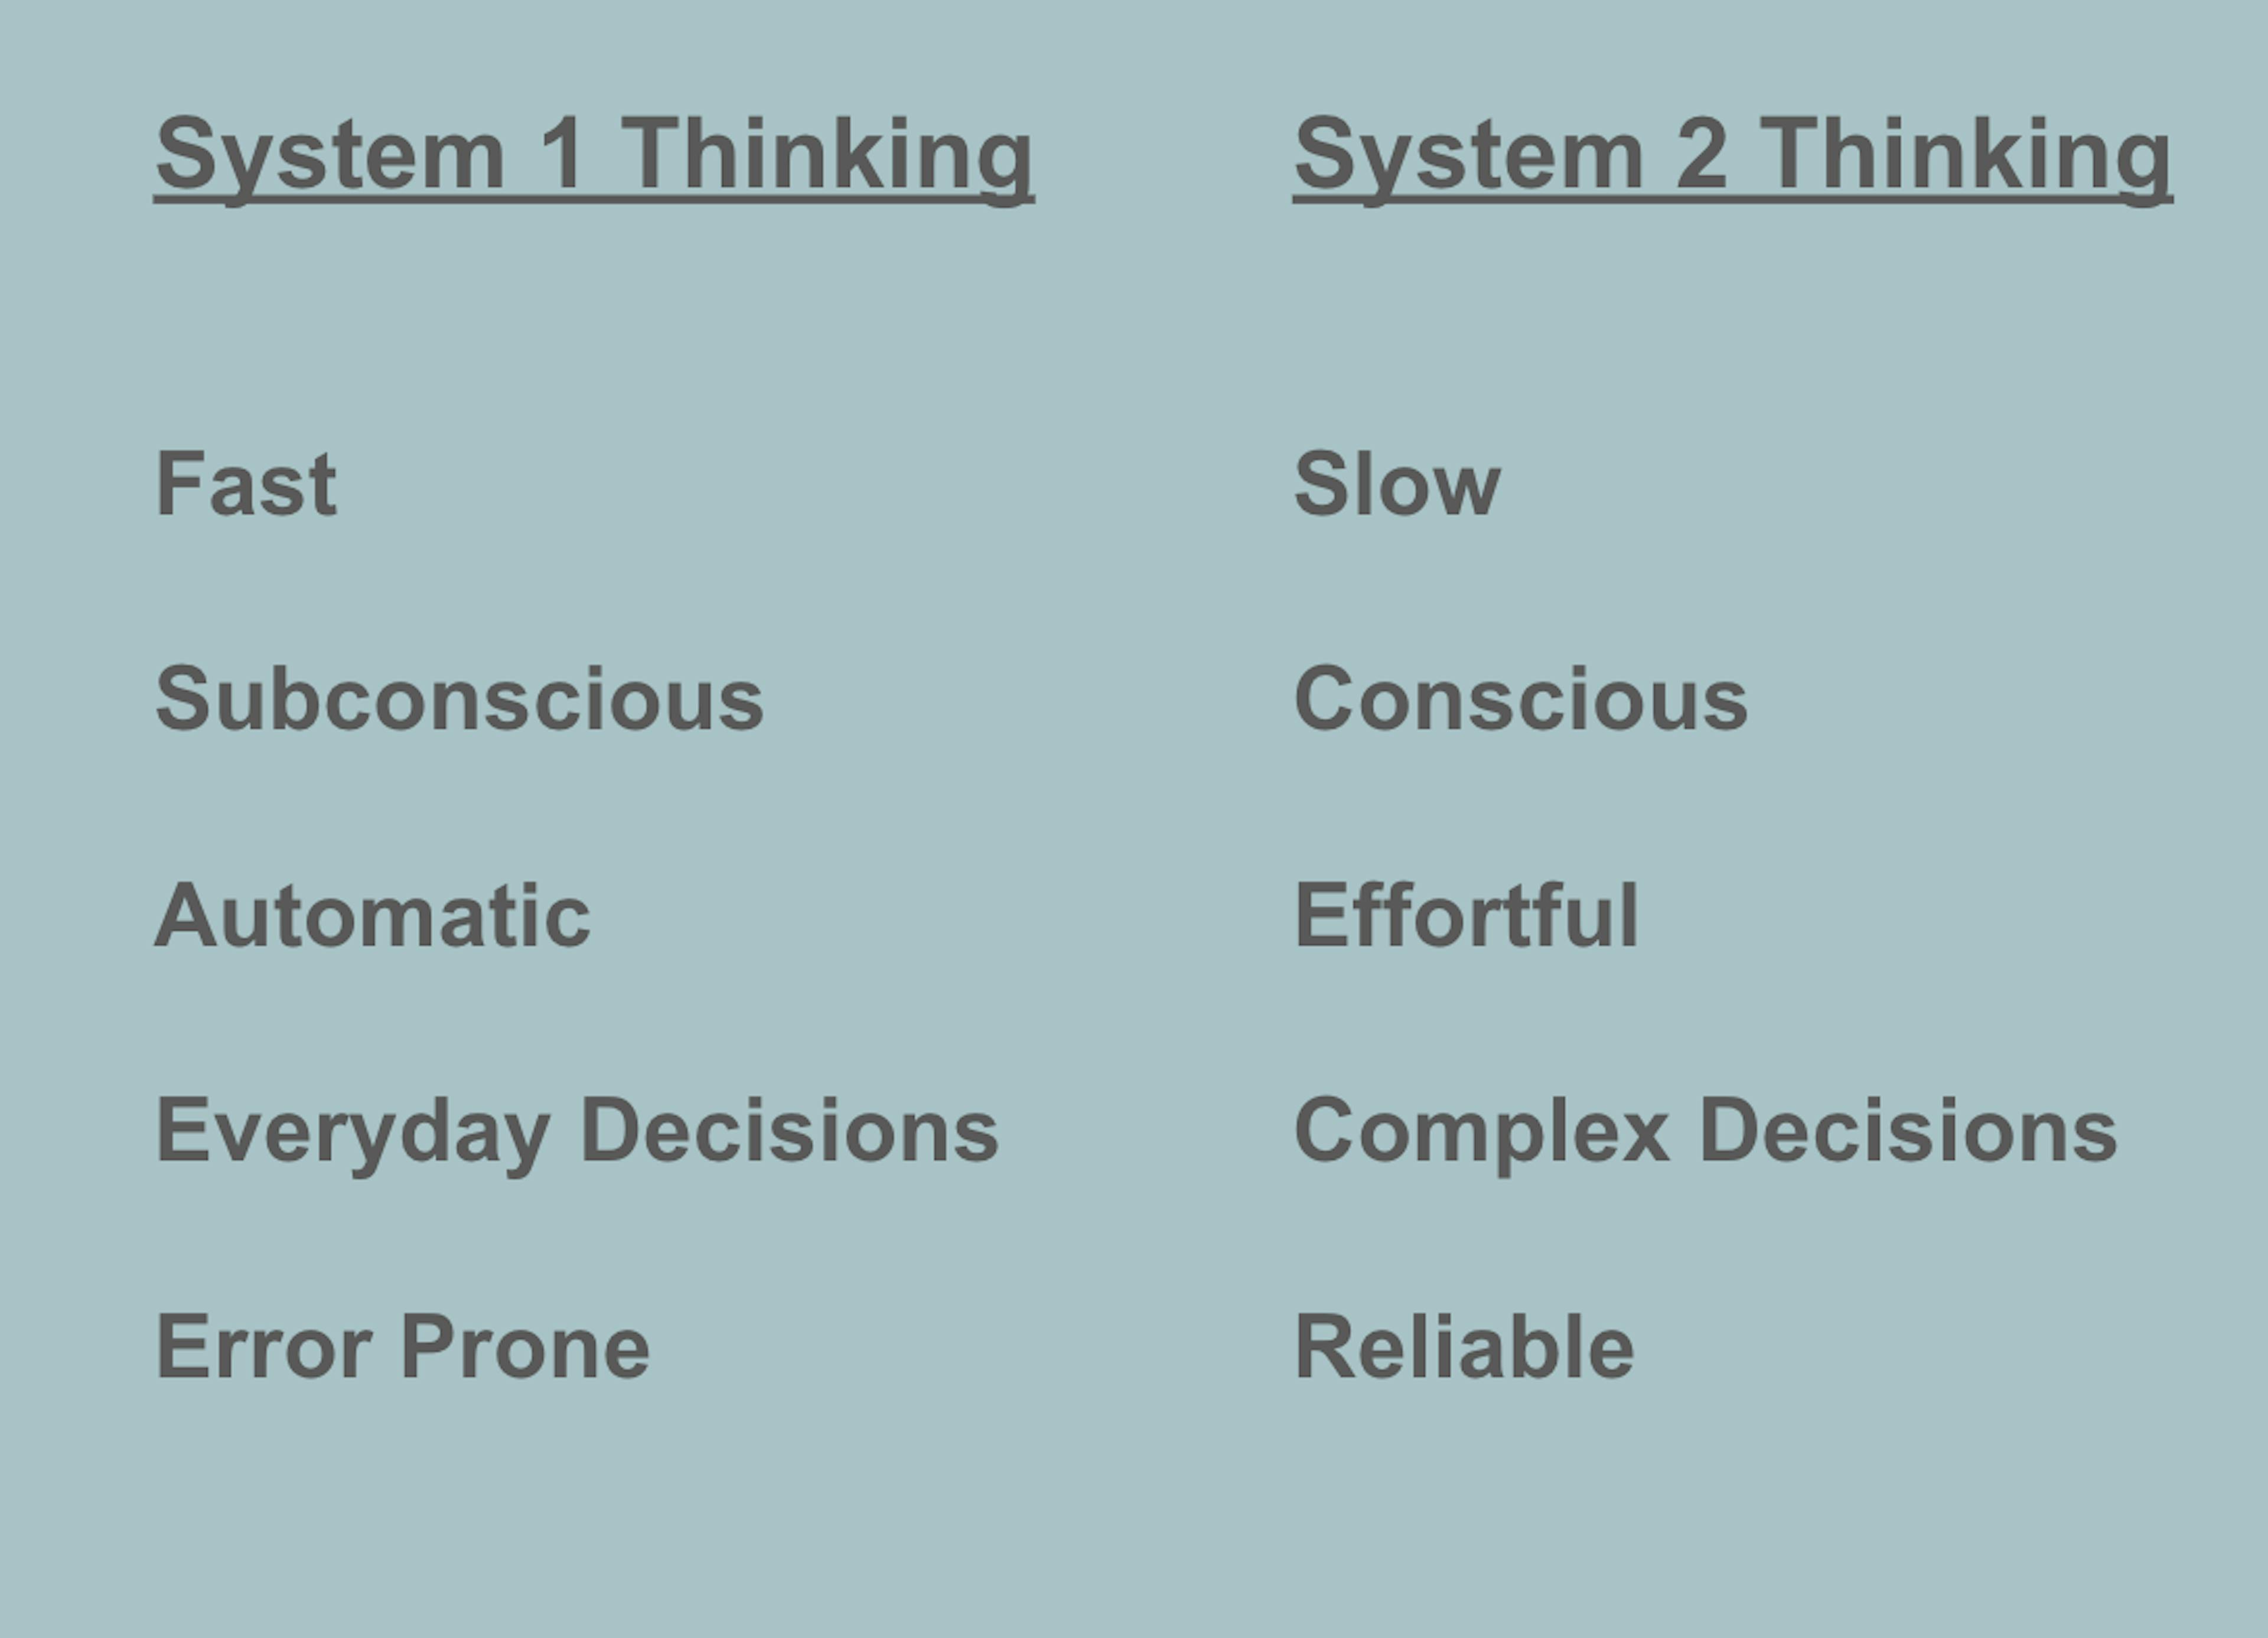 This is a table describing the characteristics of system 1 thinking versus system 2 thinking. 